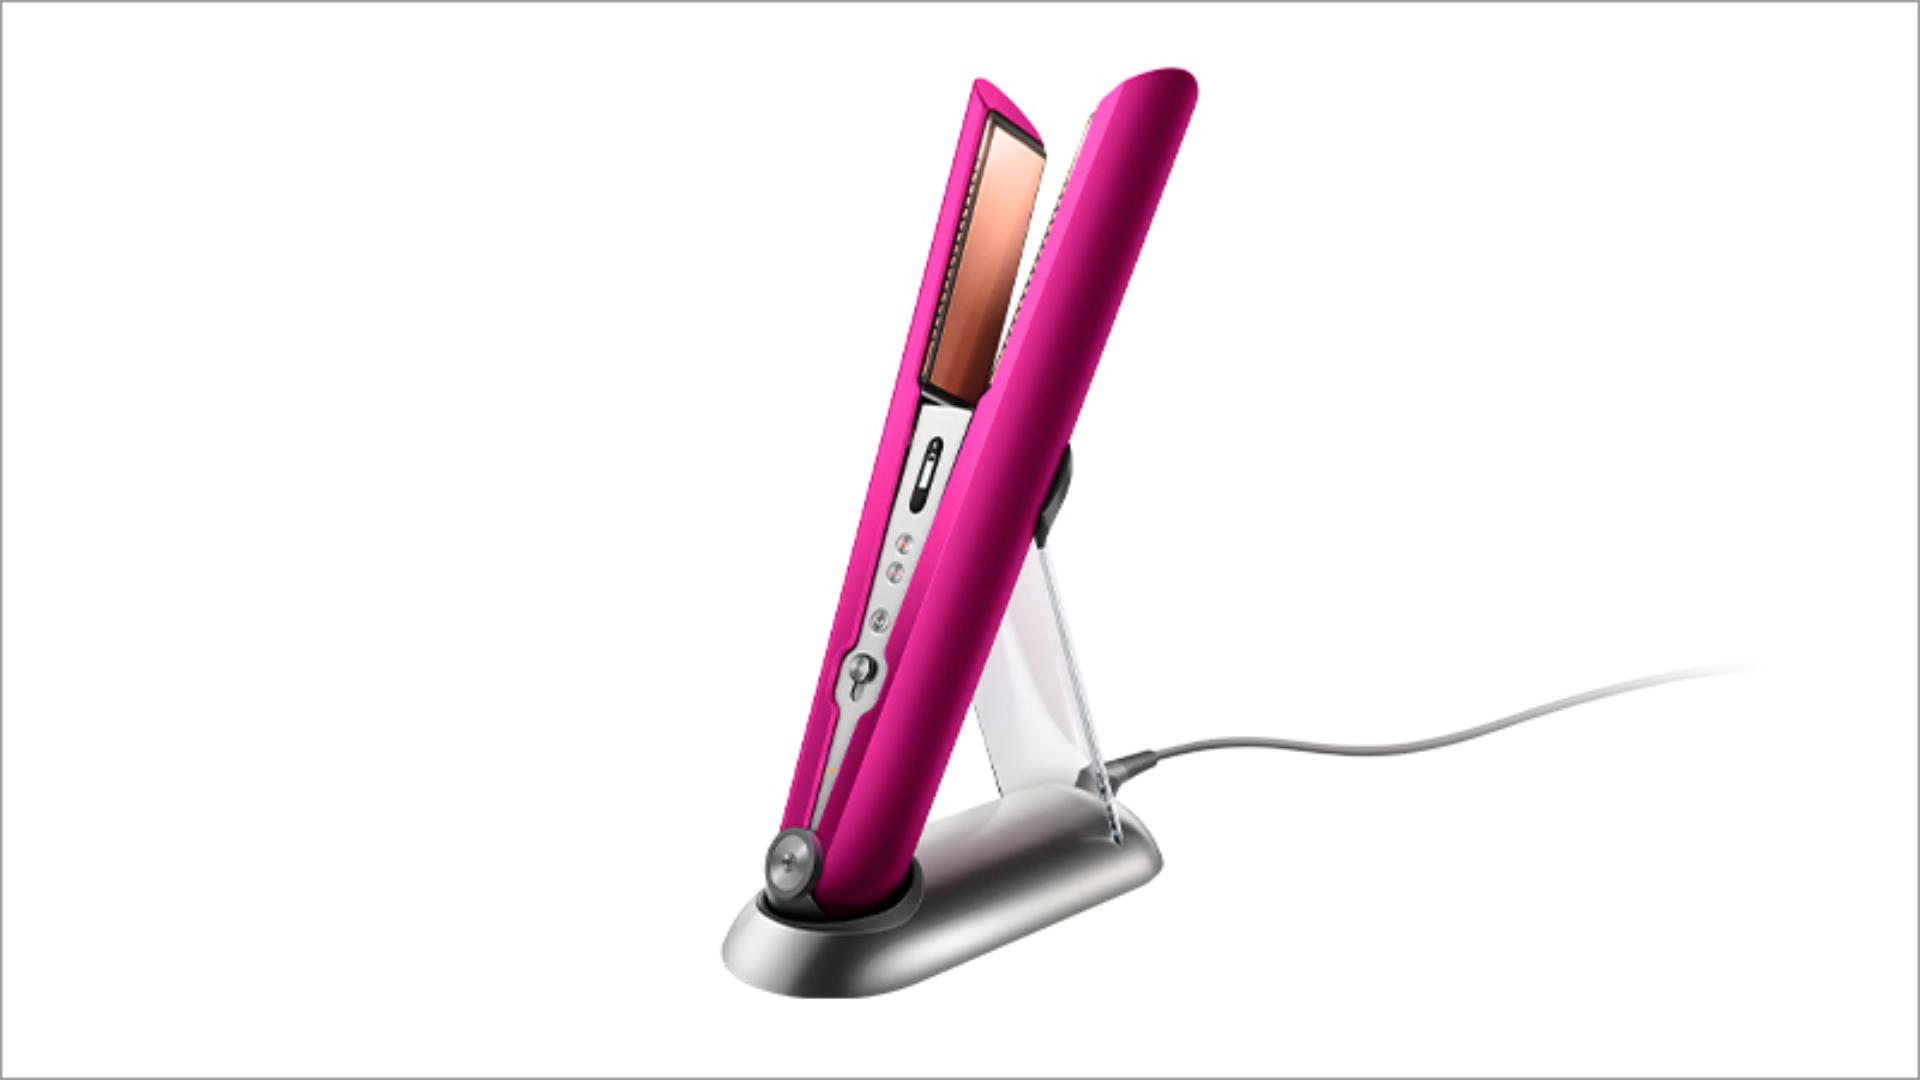 Straightener placed in the charging dock